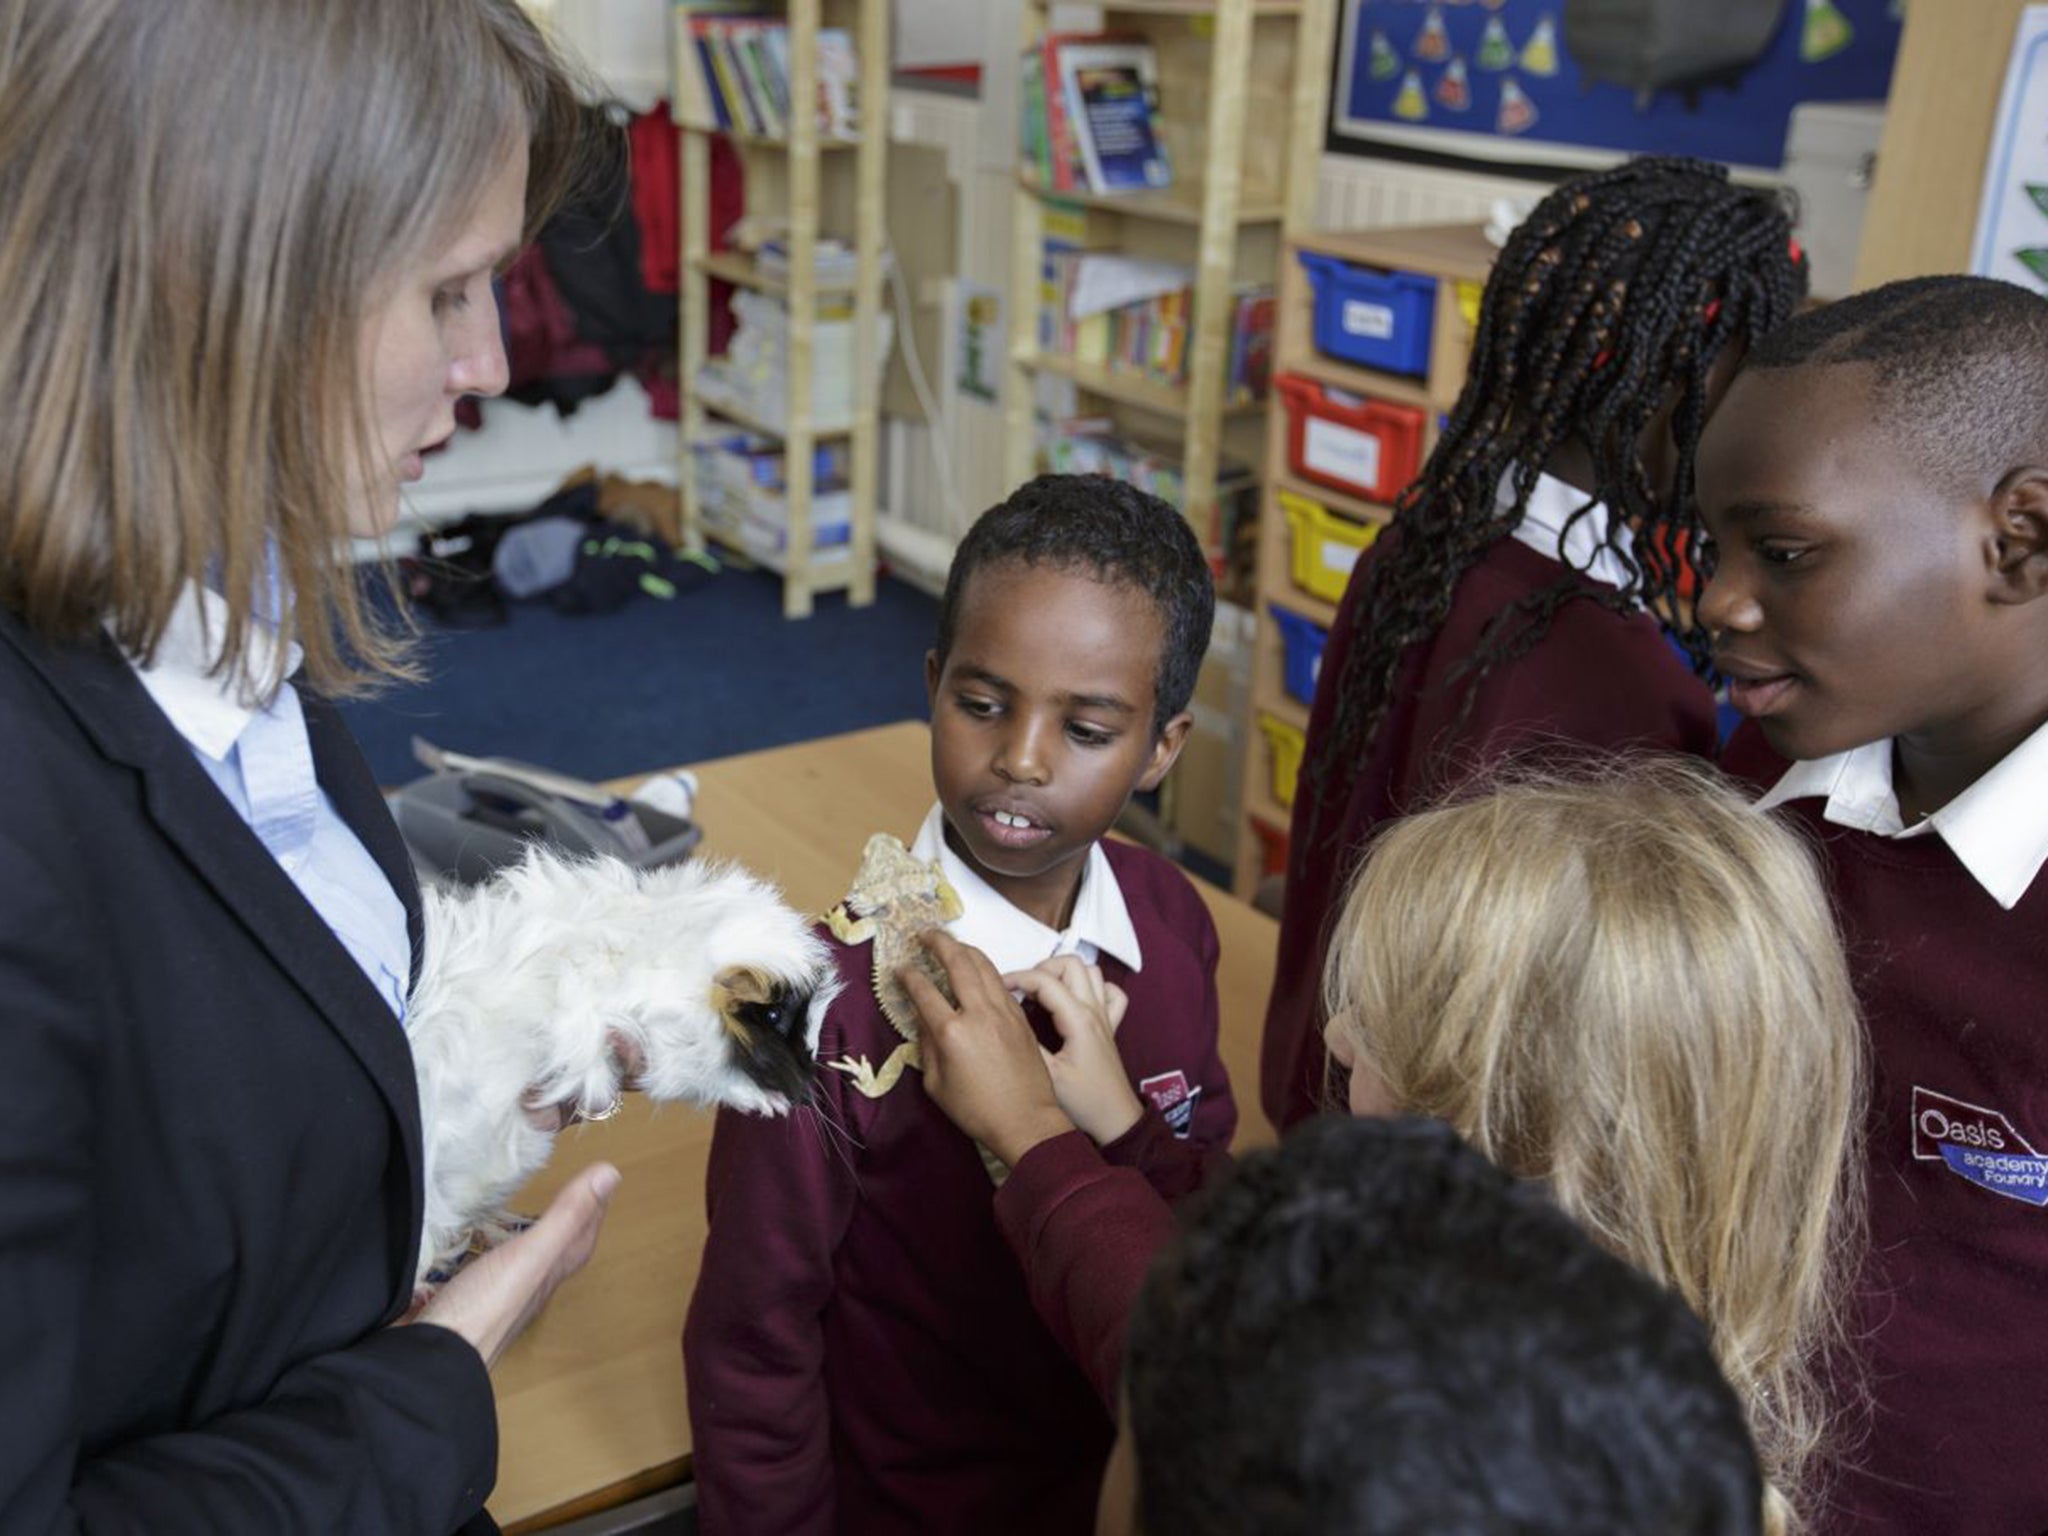 Emma Johnson with pupils at the Oasis Academy Foundry in Winson Green, Birmingham, who are encouraged to look after animals